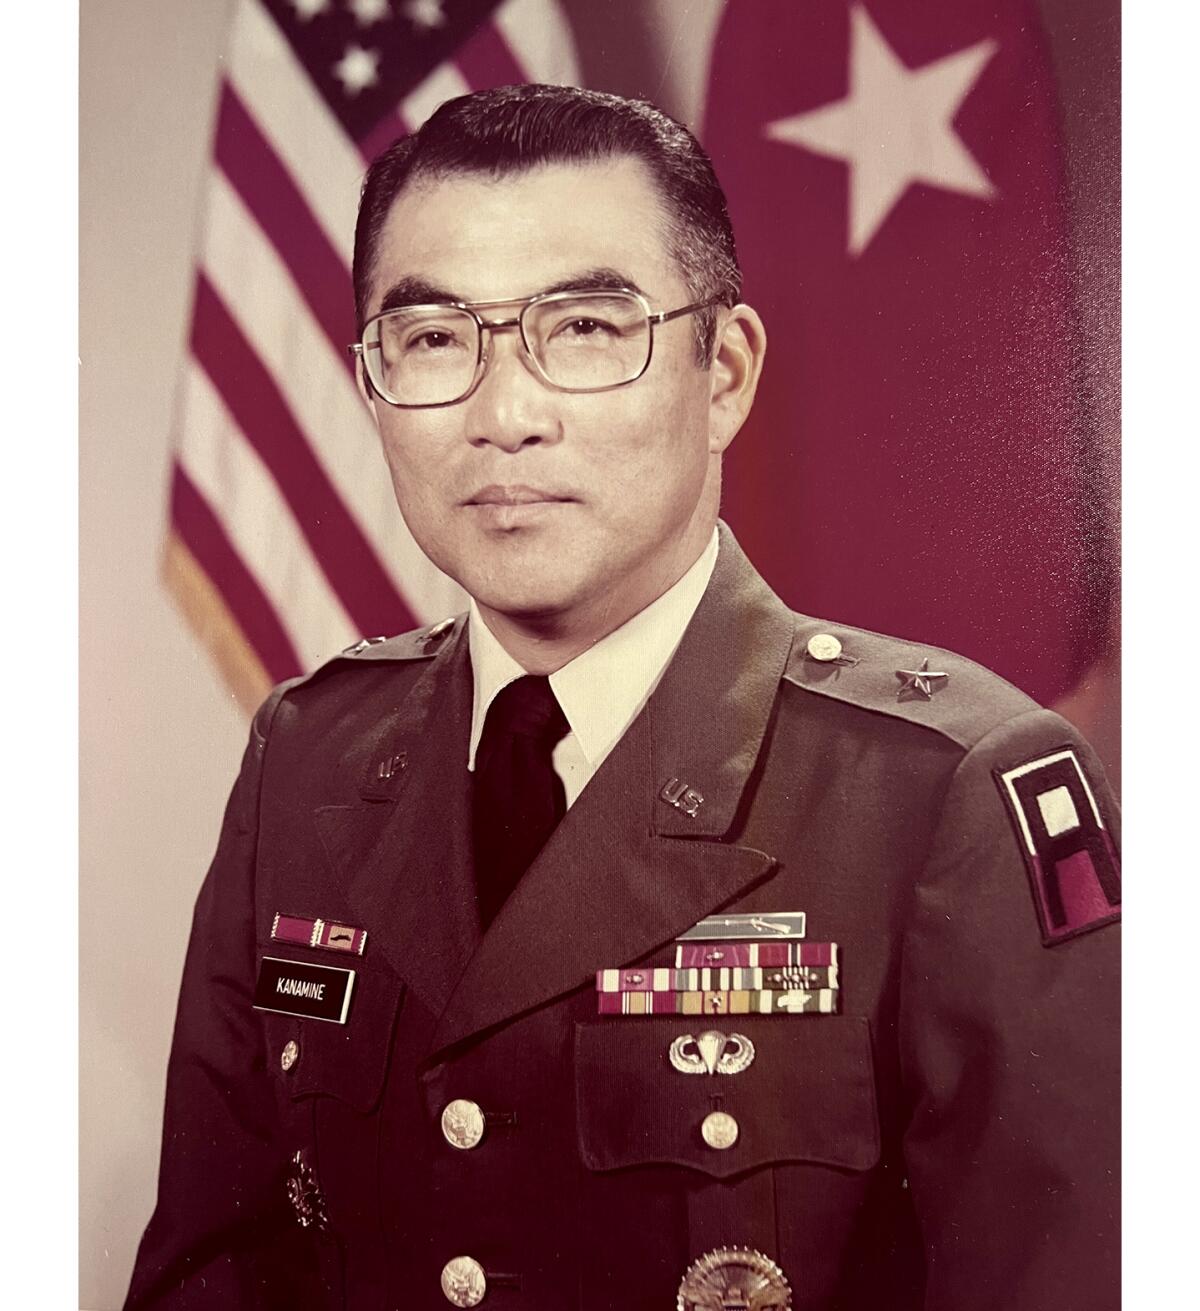 Theodore Kanamine is pictured when the U.S. Army promoted him to brigadier general in 1976.